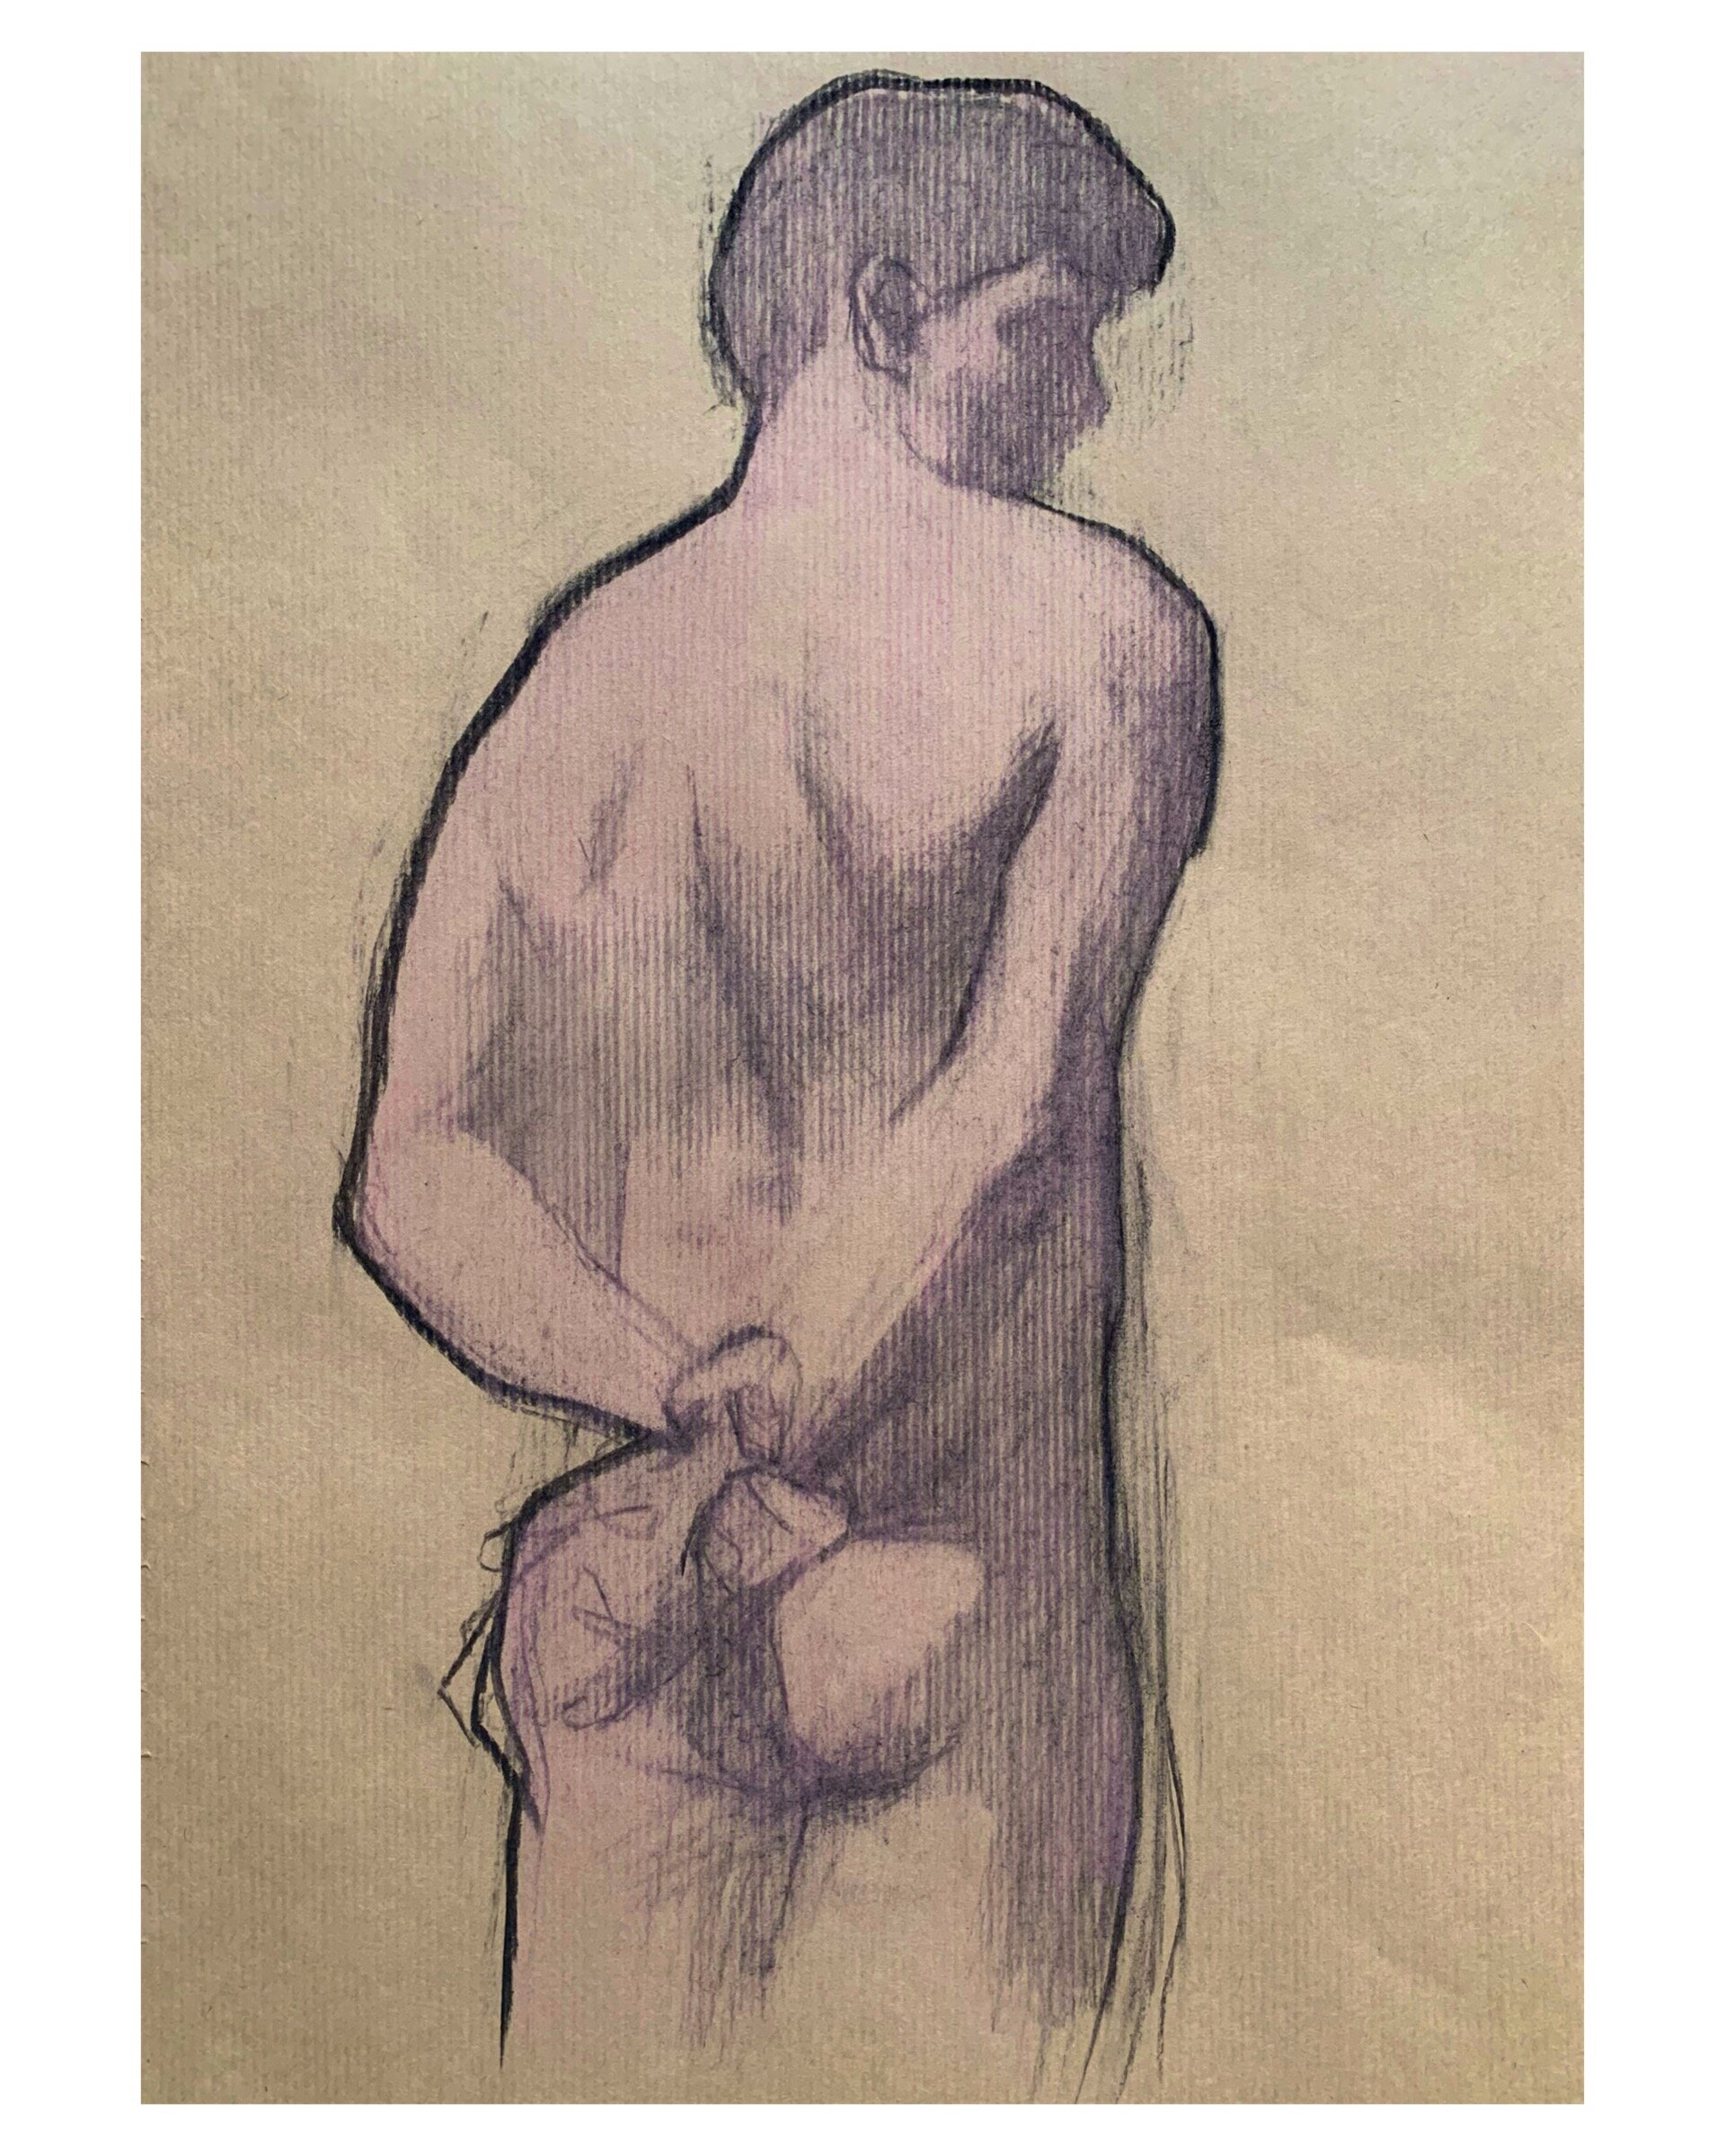   Victor 5 , charcoal and colored pencil on kraft paper, 42x28cm 